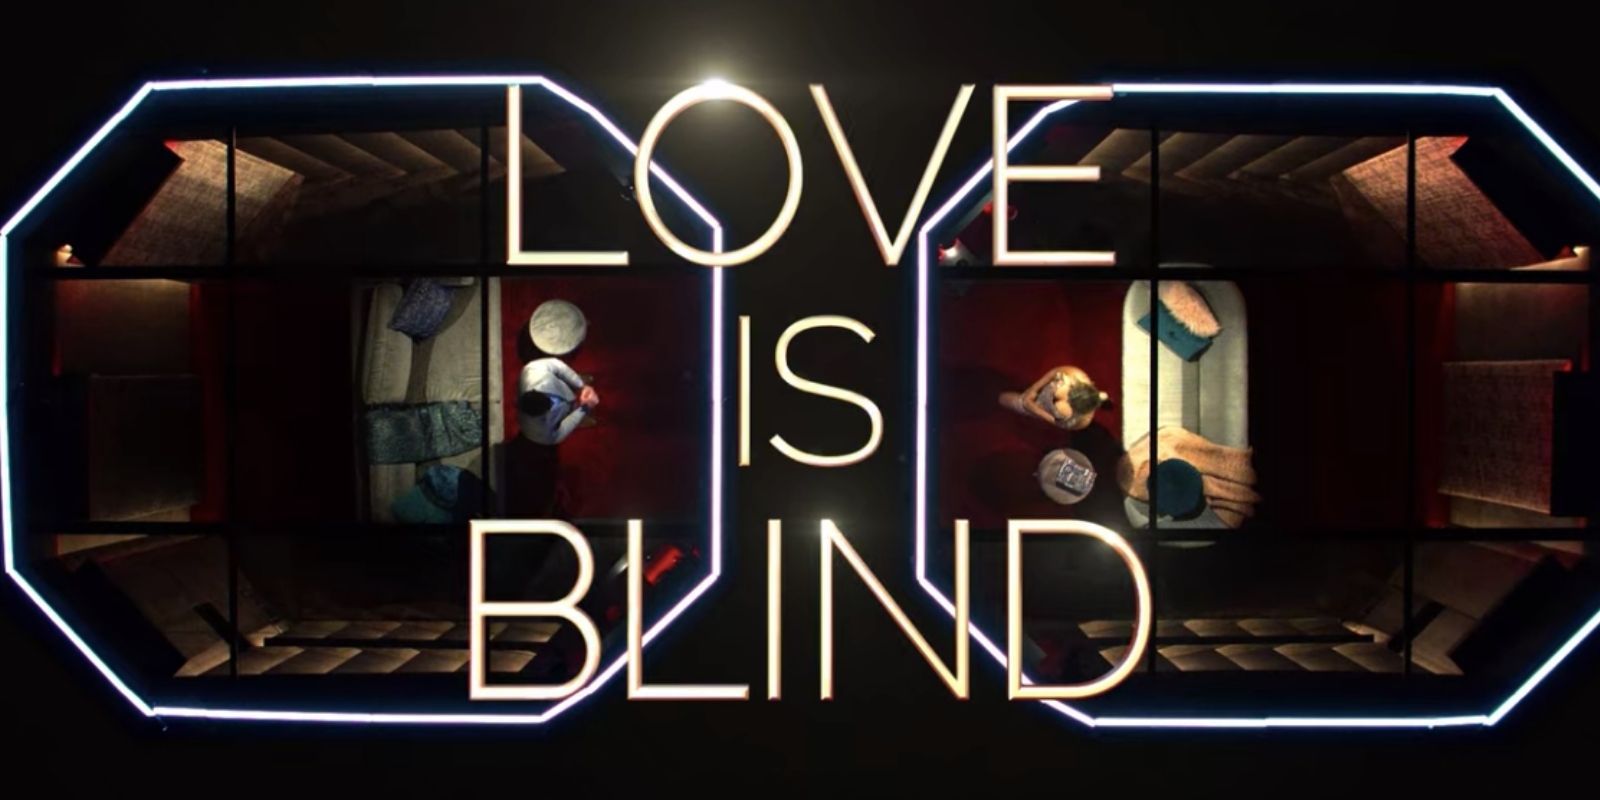 Apply for Netflix dating show 'Love is Blind' now casting in Denver